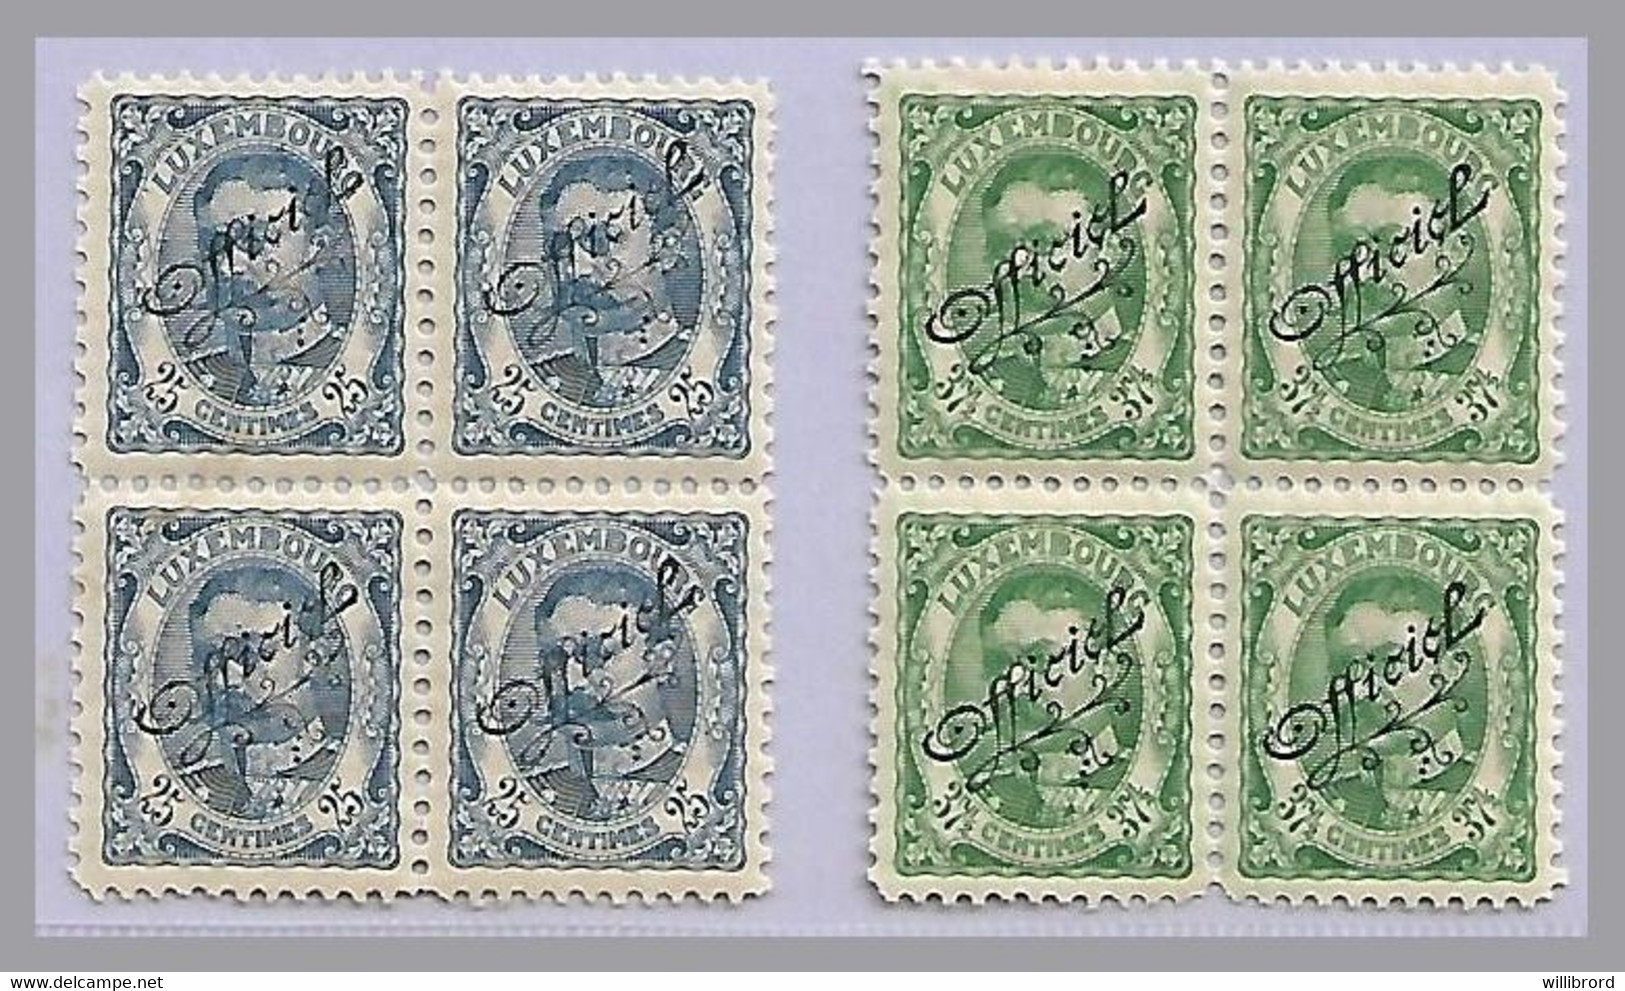 LUXEMBOURG - G.D. William IV OFFICIALS  - 25c & 37½c Blocks Of 4 - Mint Never Hinged - 1906 Wilhelm IV.